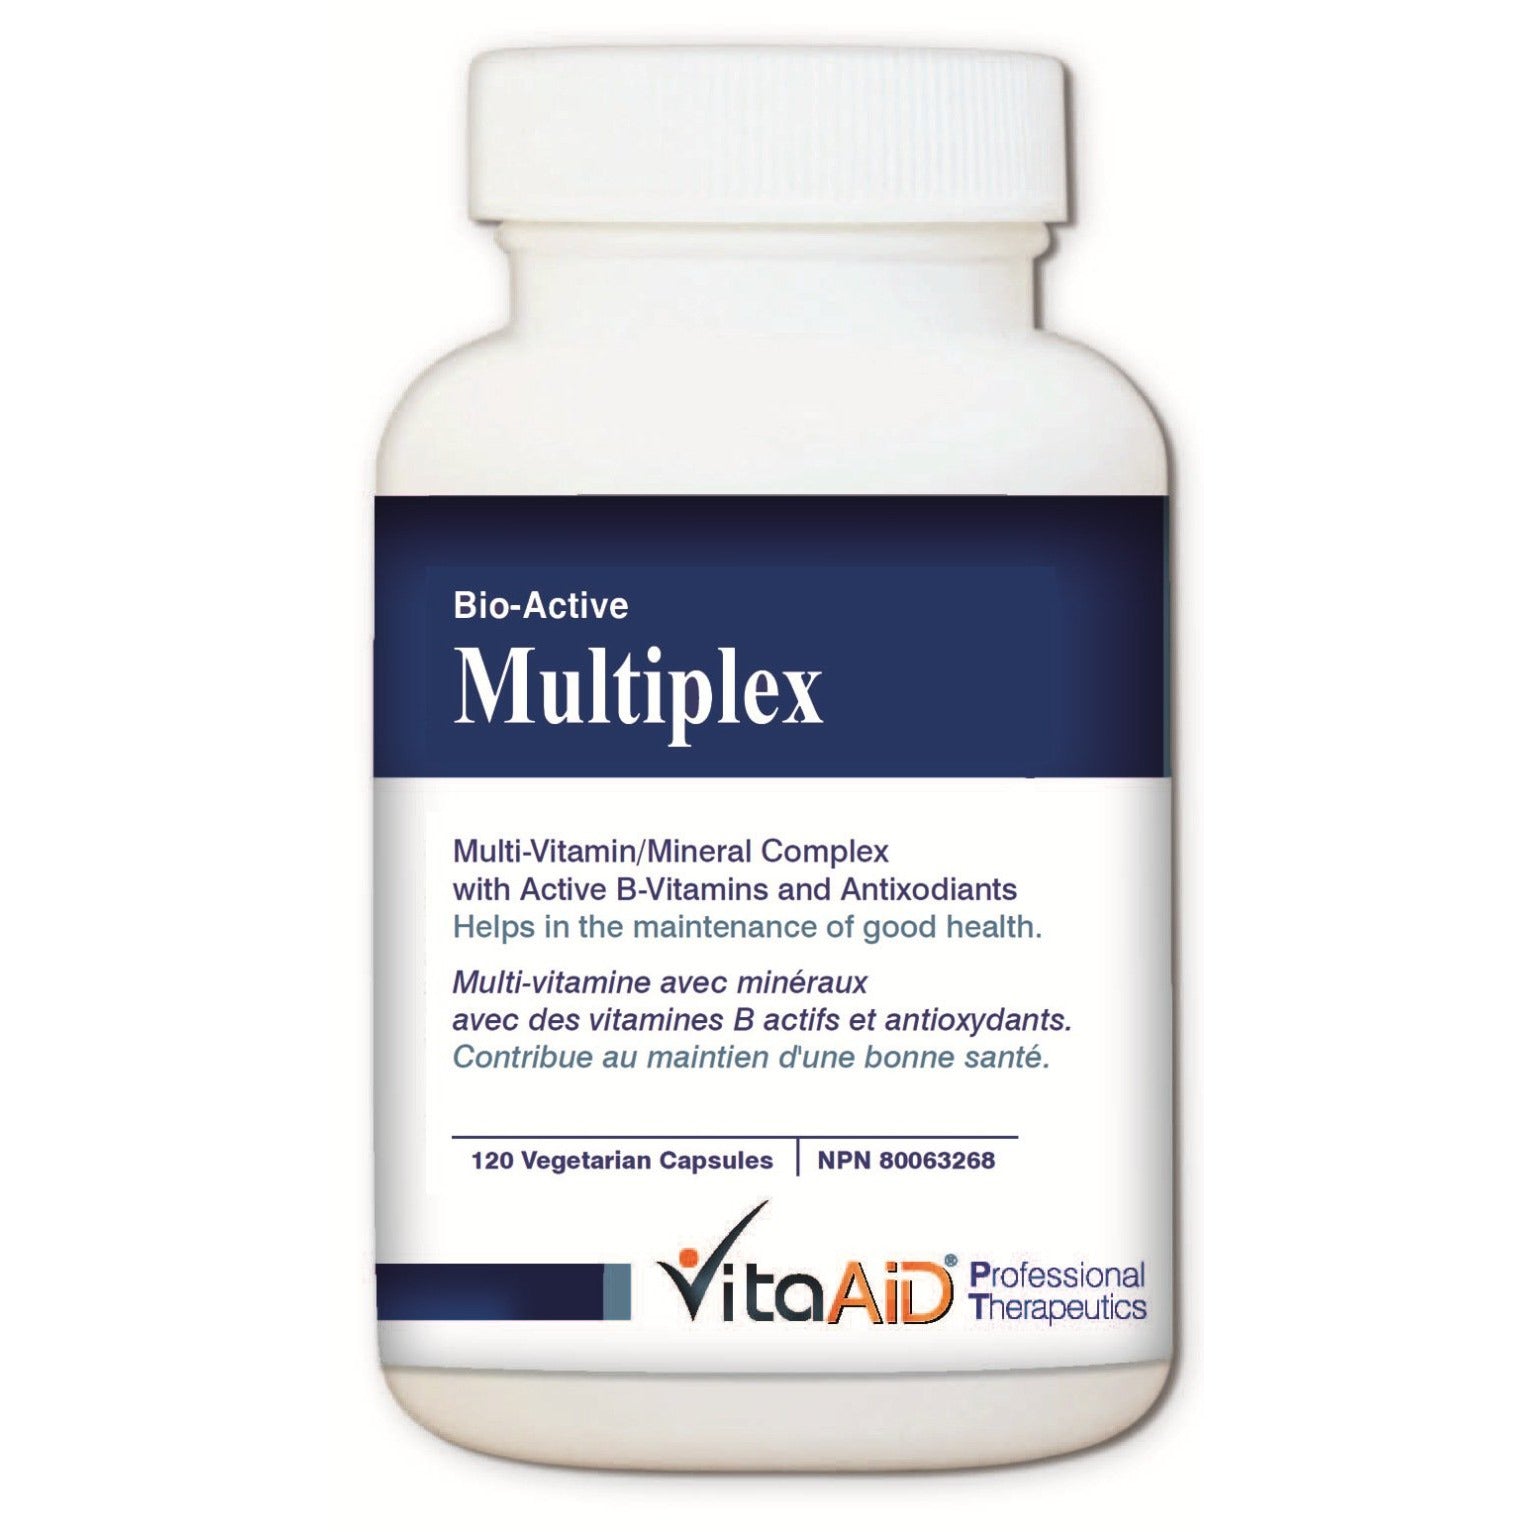 Bio-Active Multiplex Multiple Vitamins and Mineral Complex with Active B-Vitamins for Optimal Methylation, Plus Herbs and Antioxidants 120 veg caps